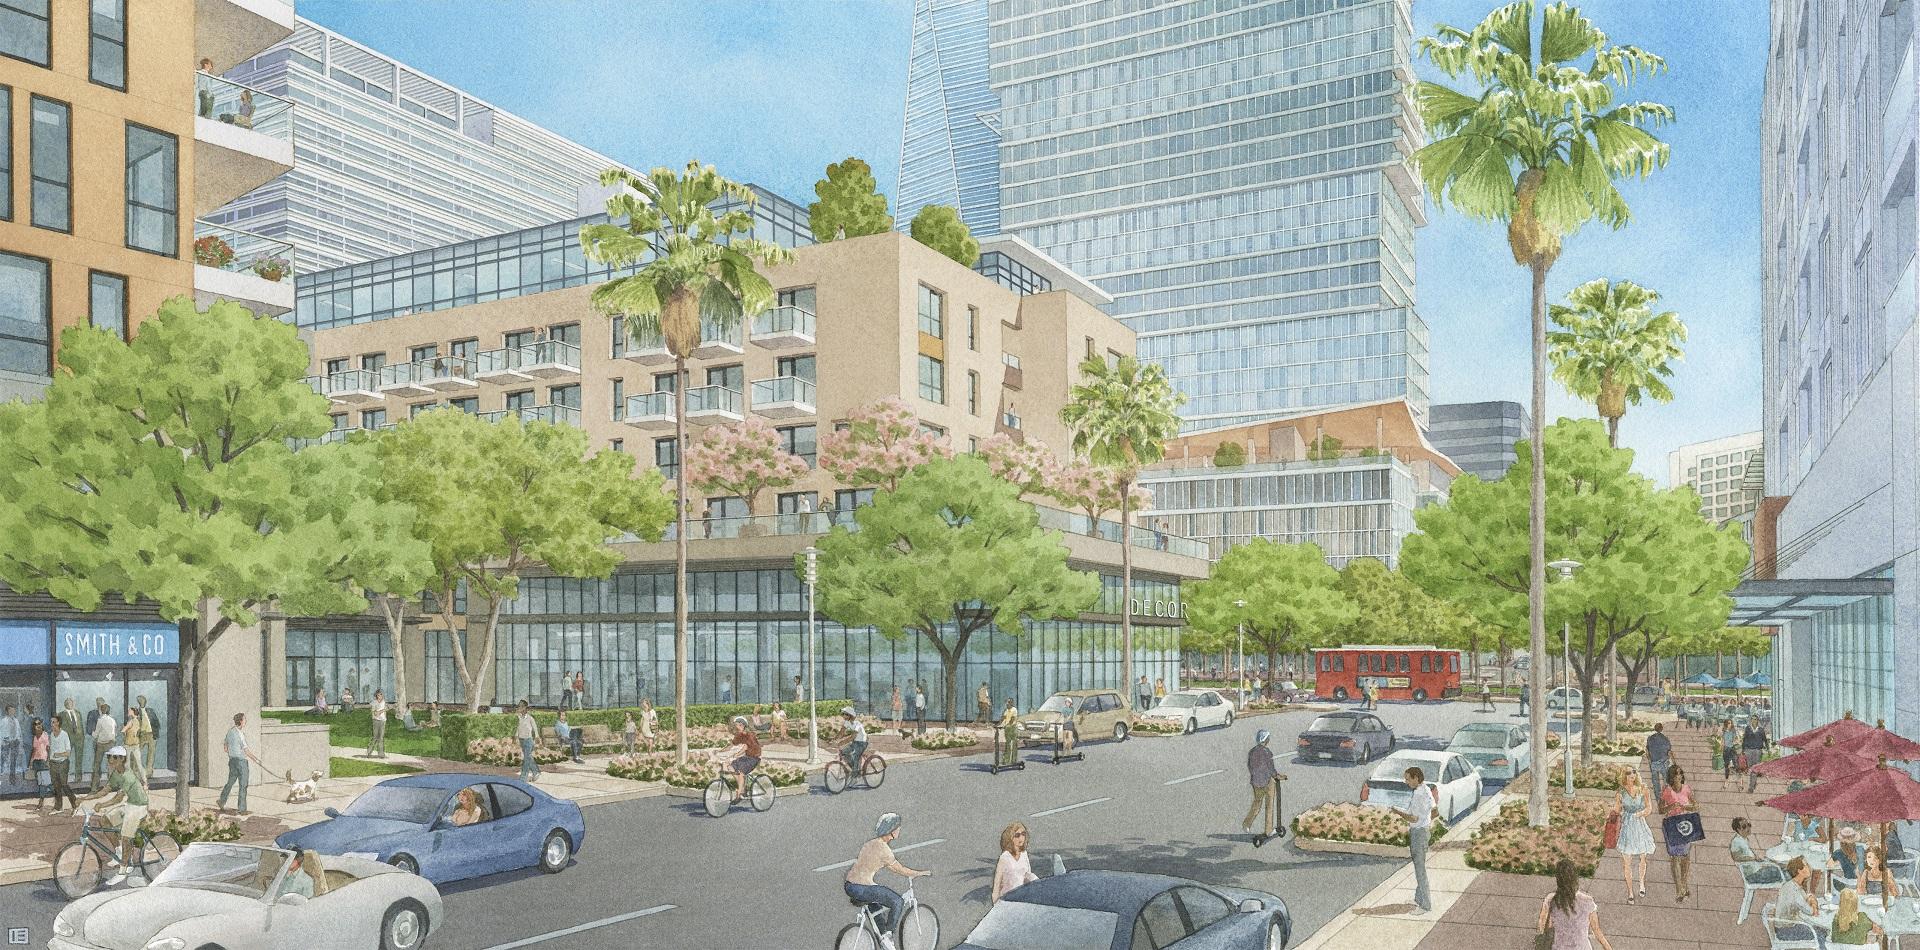 LA City Council approves new Westfield mall in Woodland Hills